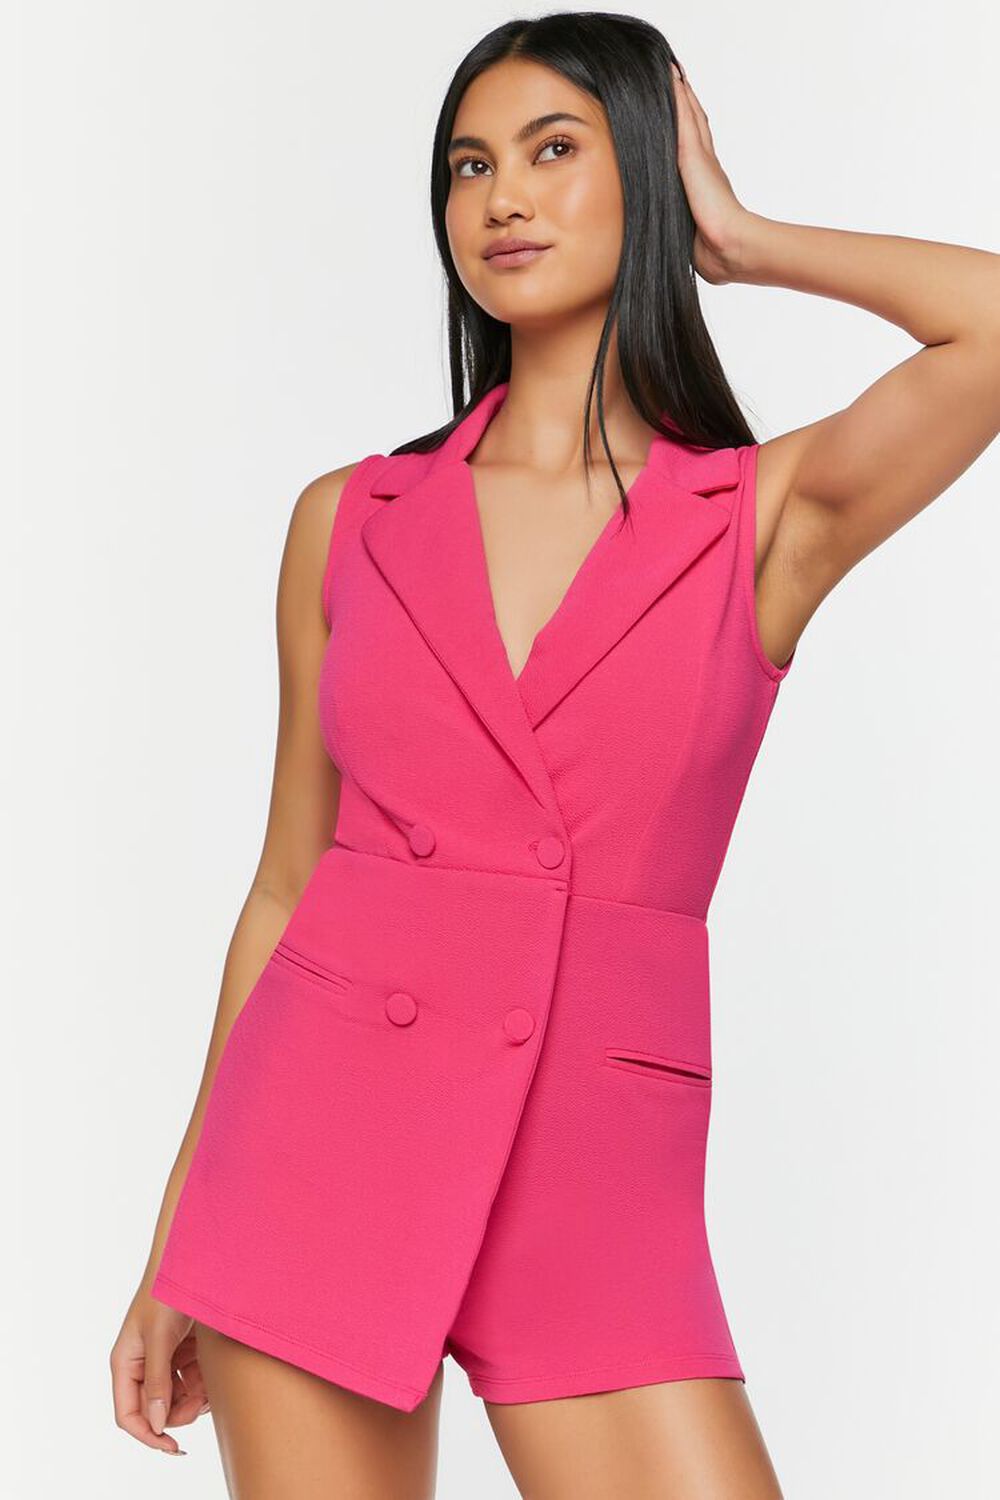 PINK Sleeveless Double-Breasted Romper, image 1